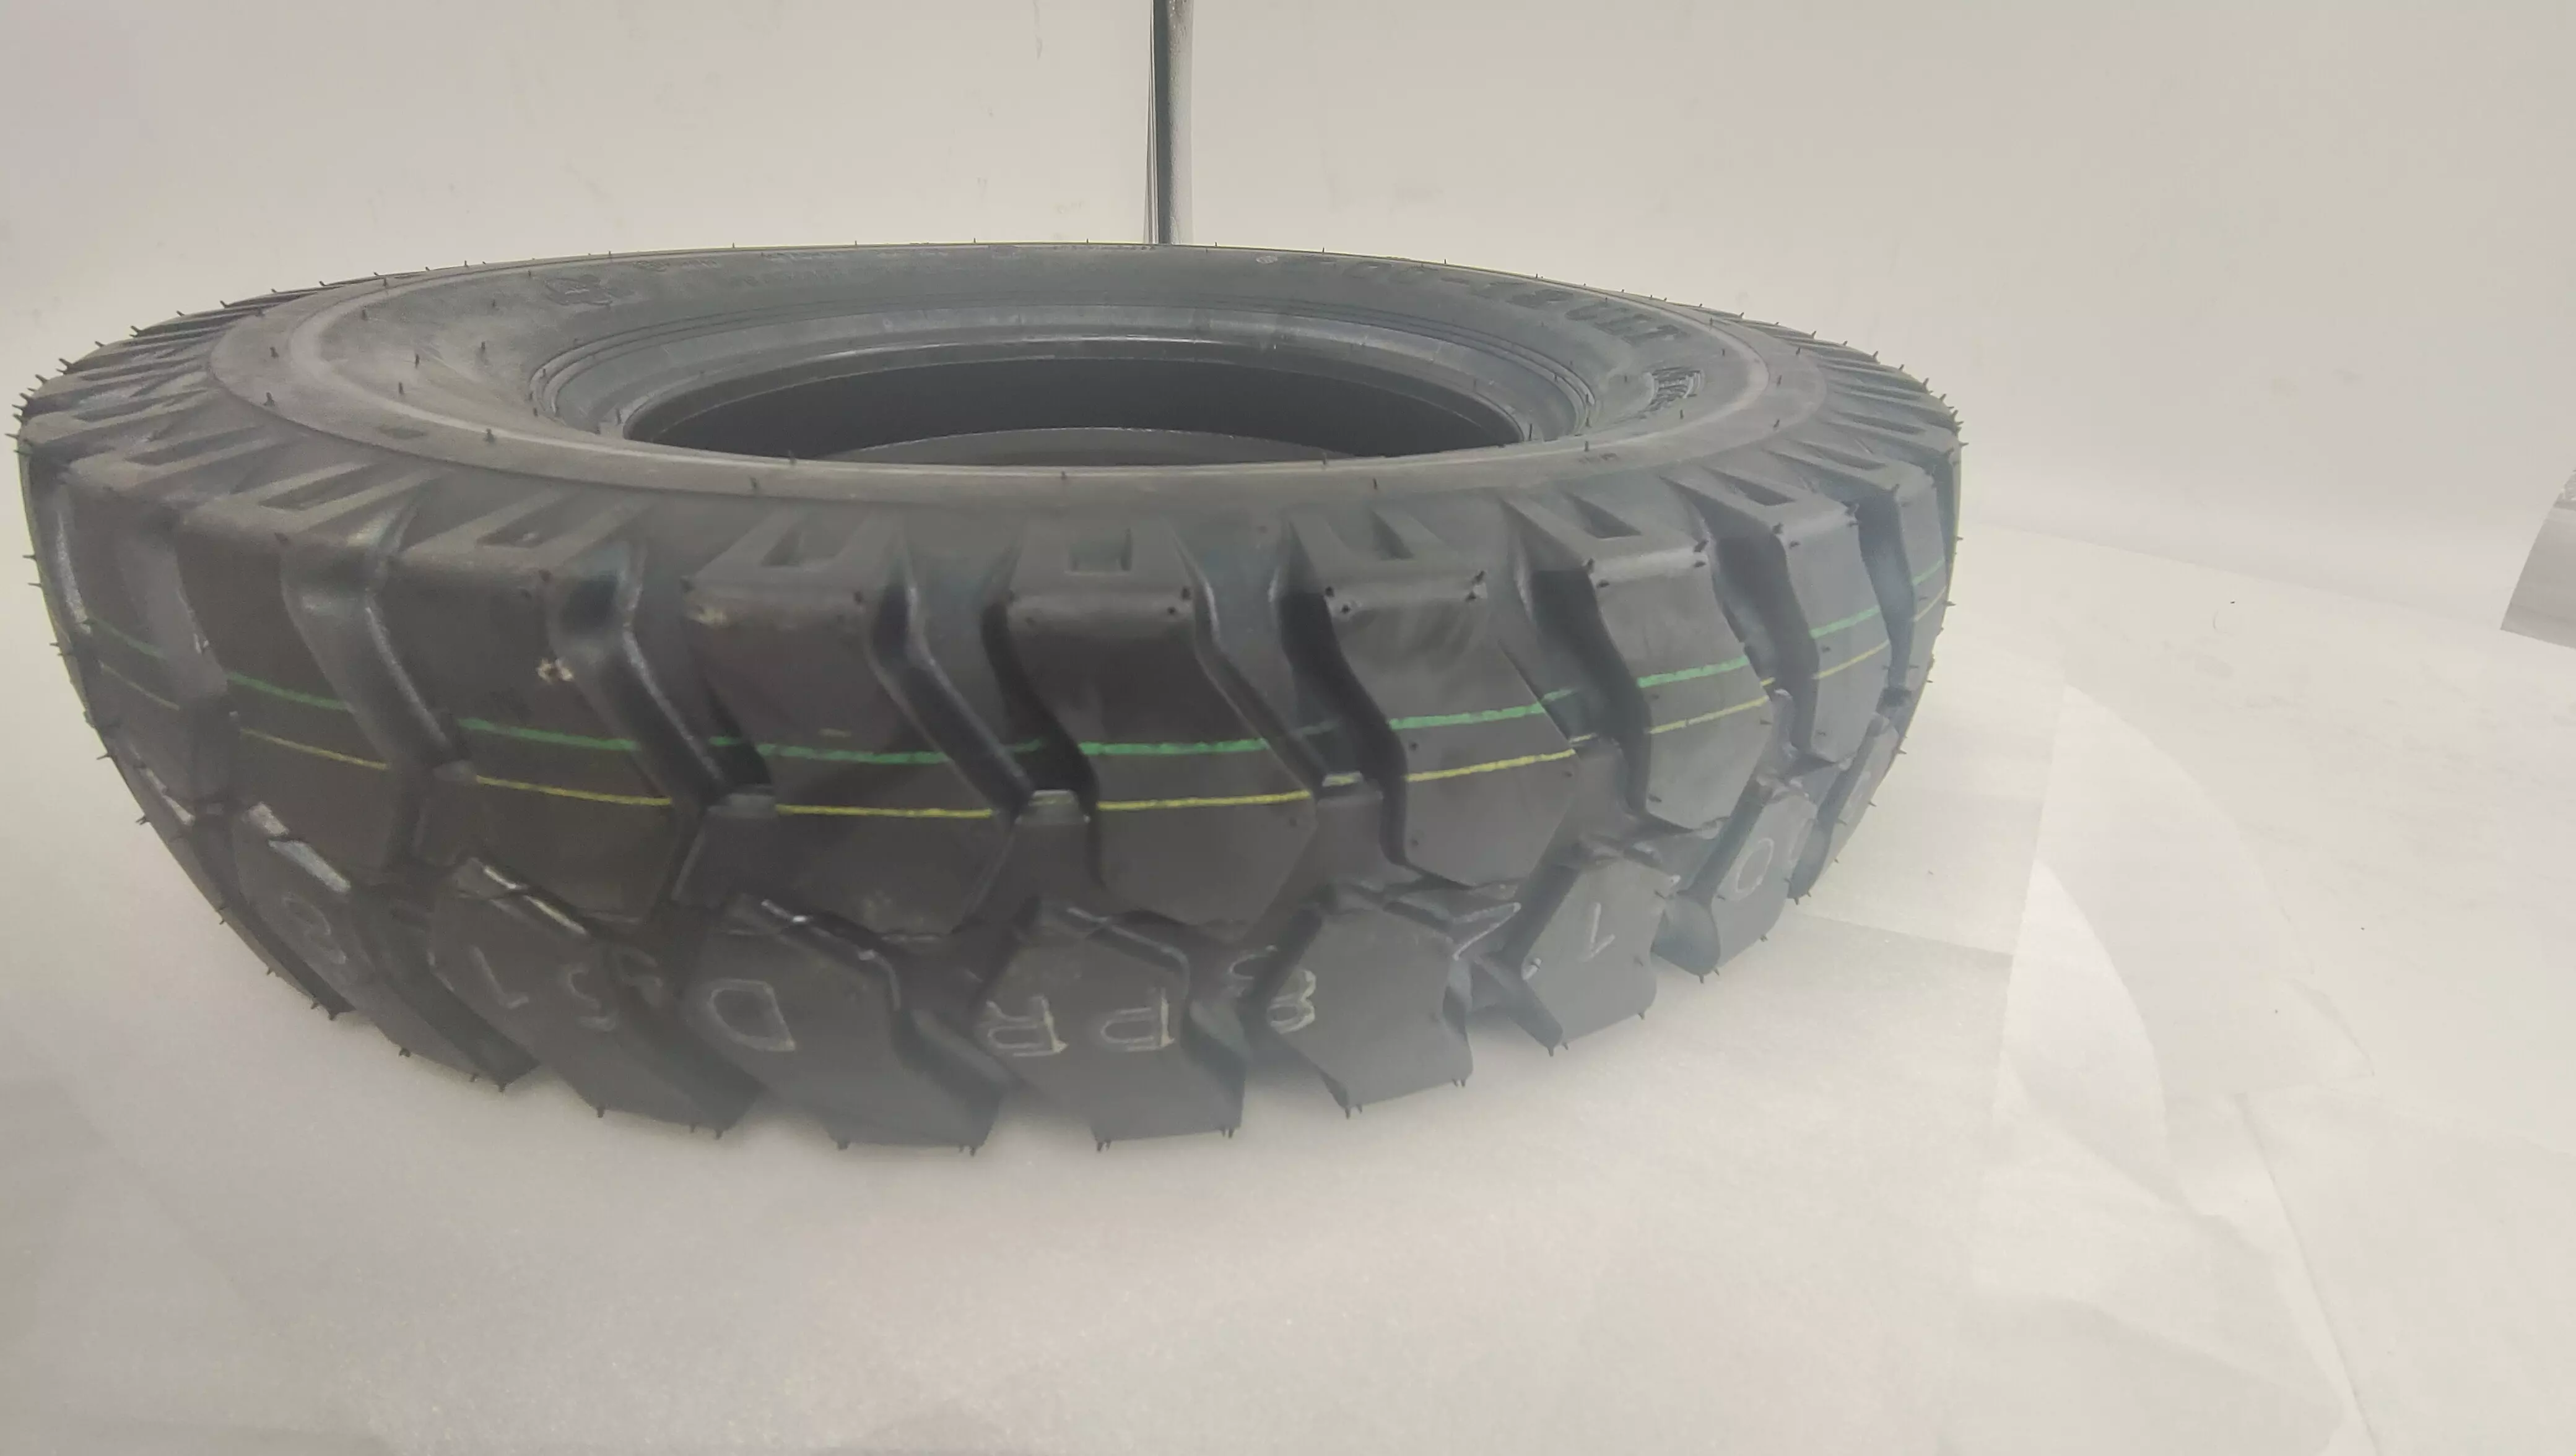 Professional Manufacture Durable Tricycle Wheels Rubber Chinese Passenger Car Tyre Tire Casing Natural First-class 128 Countries